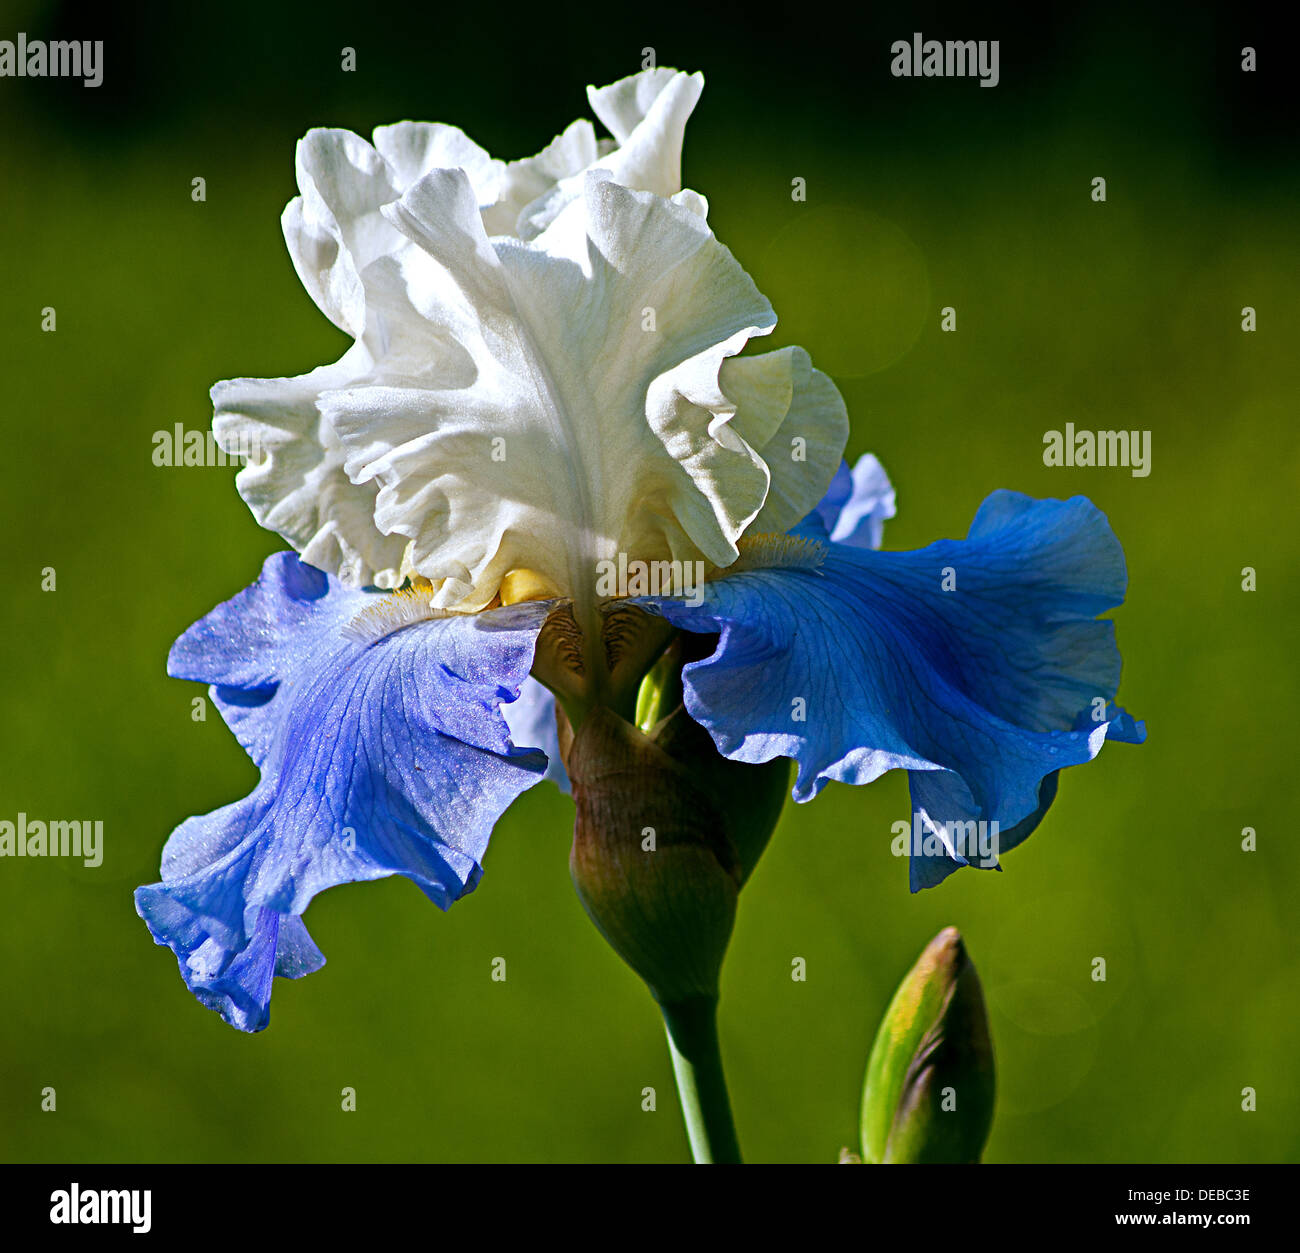 white and blue iris flower on the green grass background Stock Photo